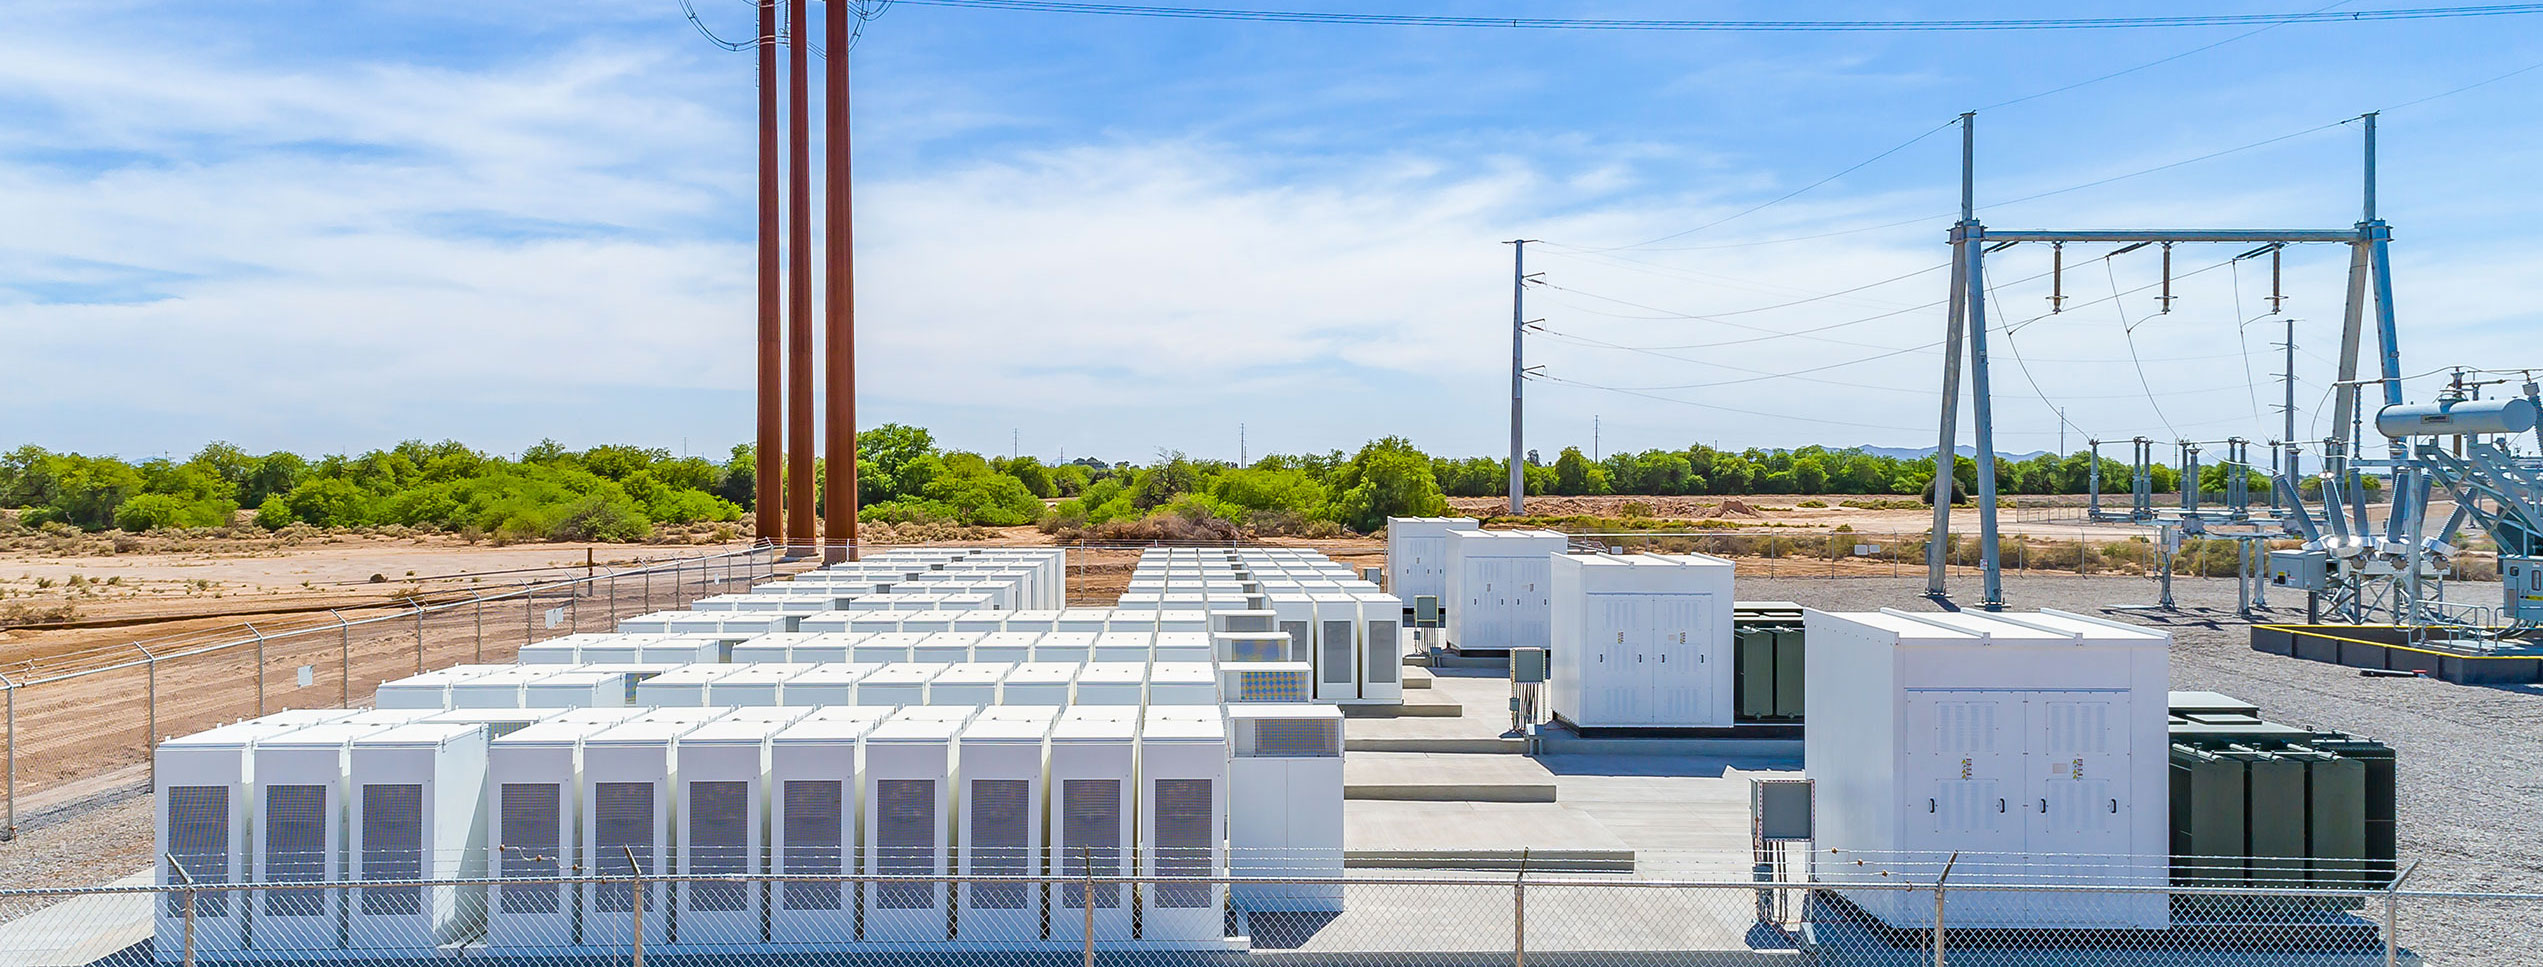 Solar and Energy Storage Project